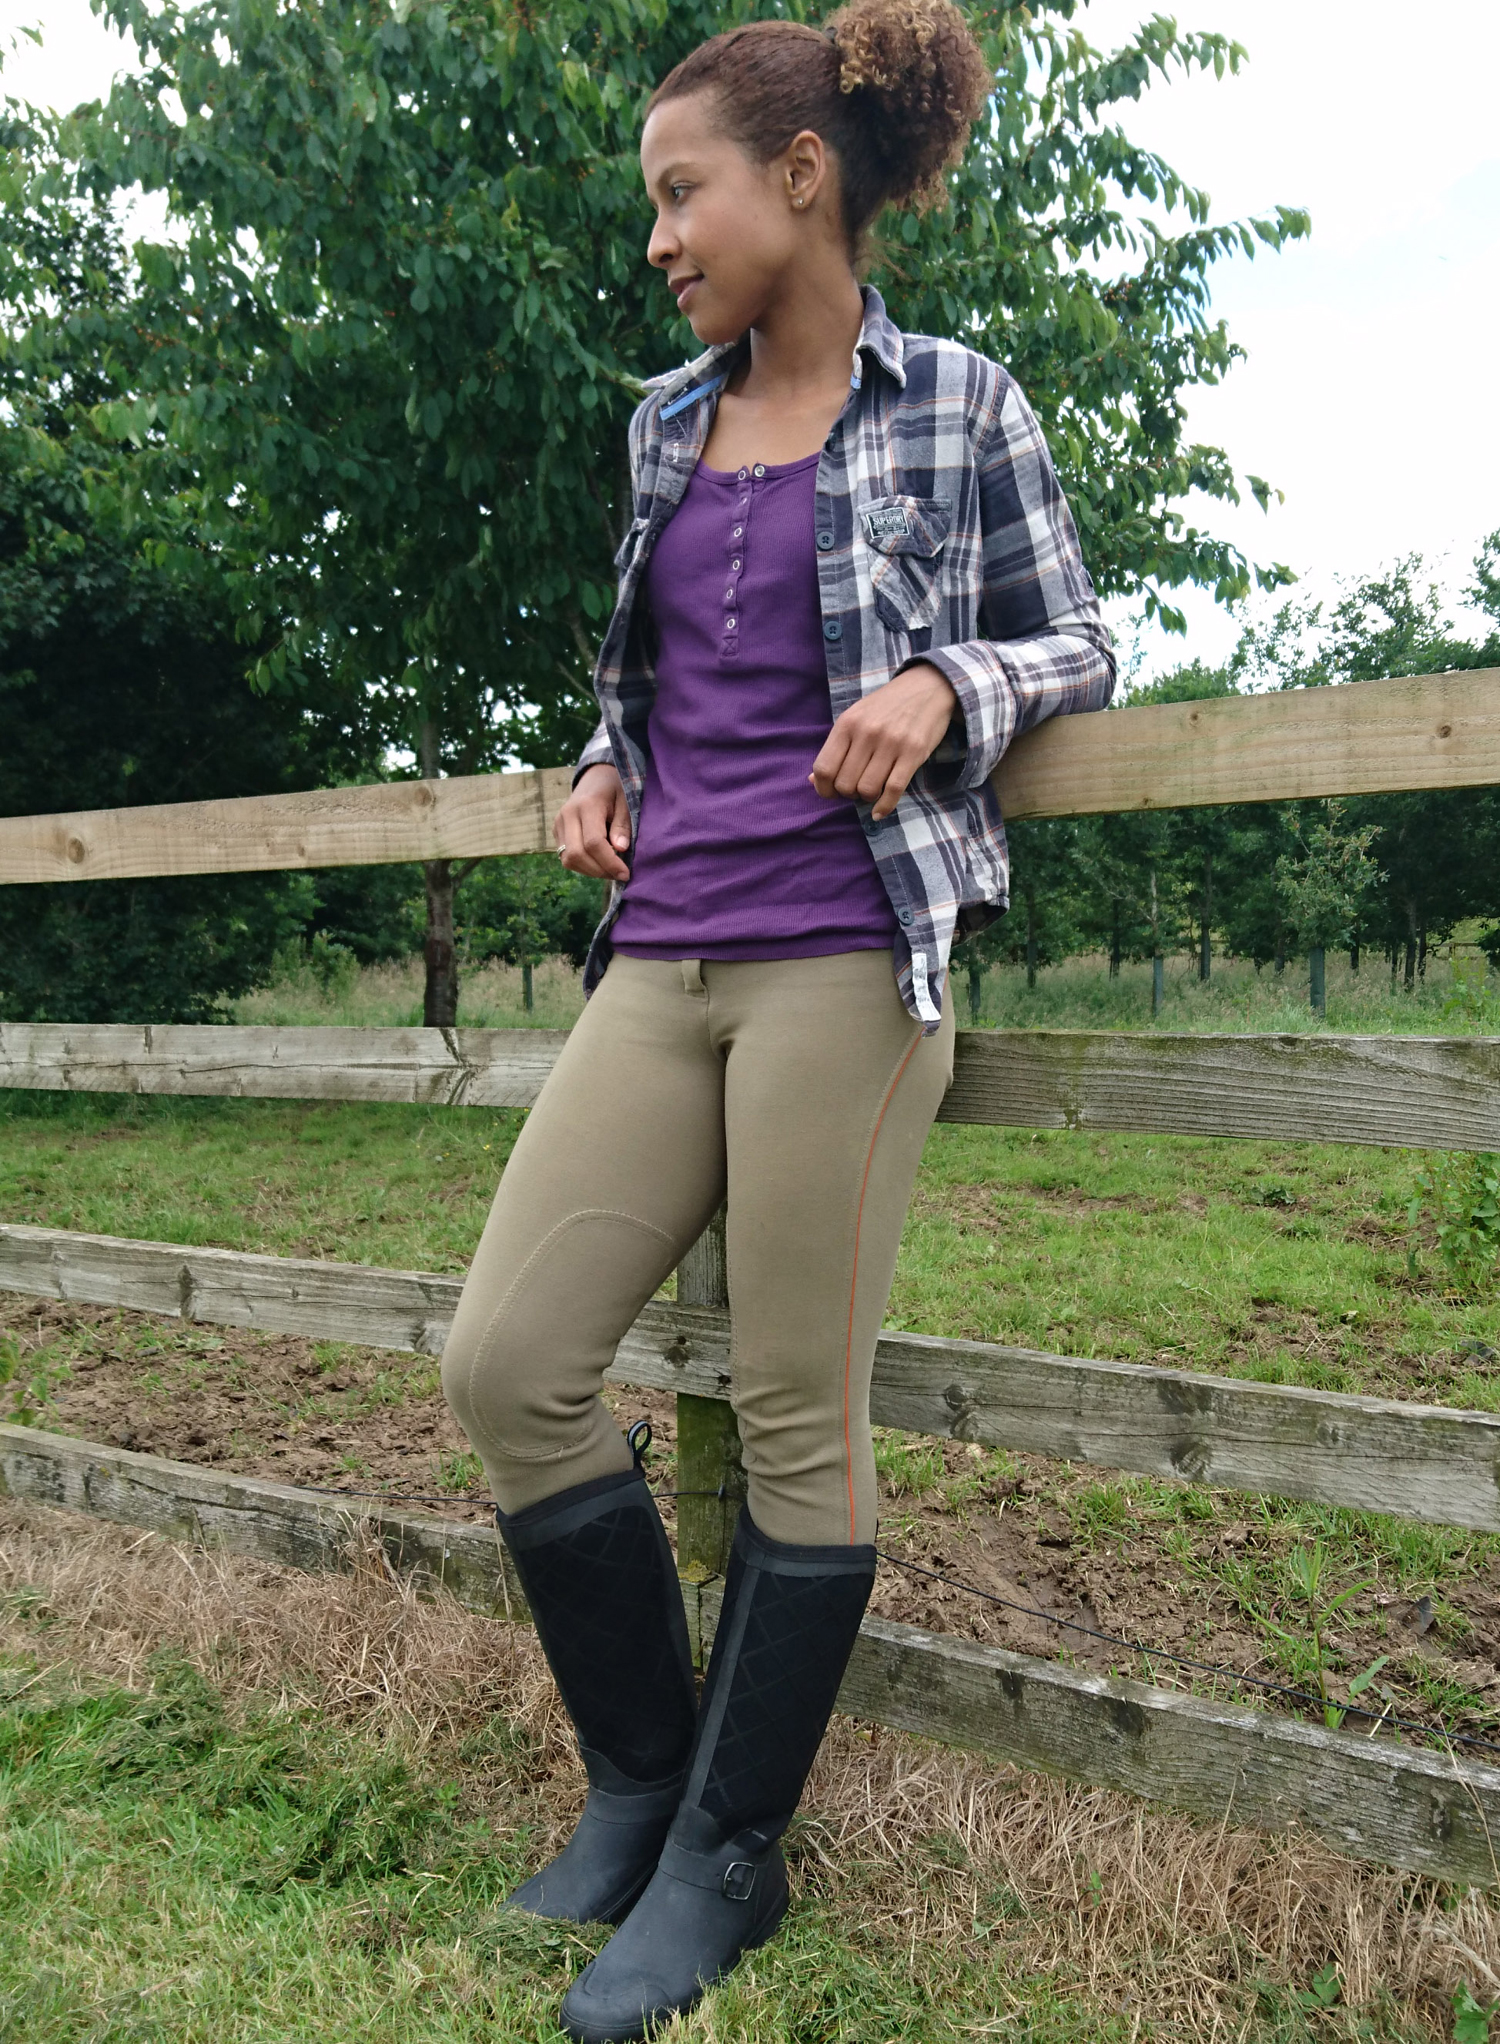 Muck Boots Pacy Riding Boots Review